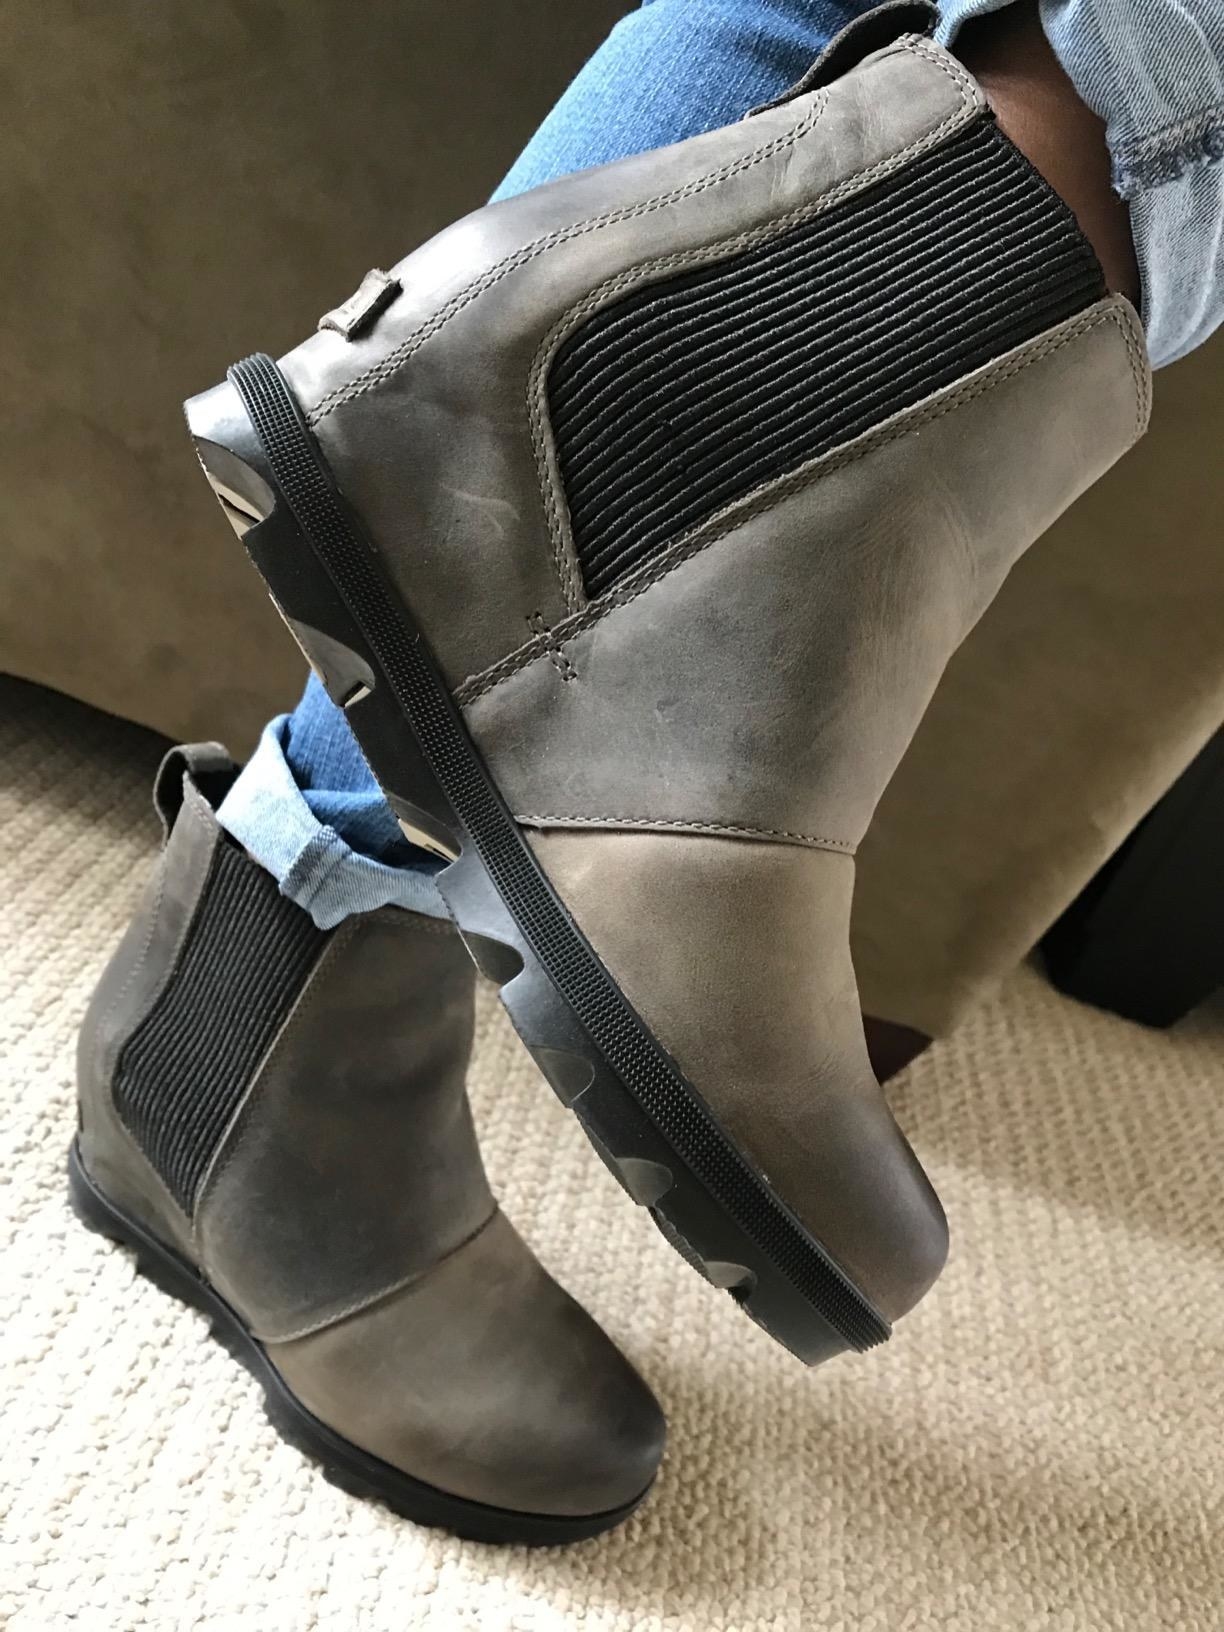 Reviewer wearing the wedge boots with wavy black sole with wide elastic section on either side